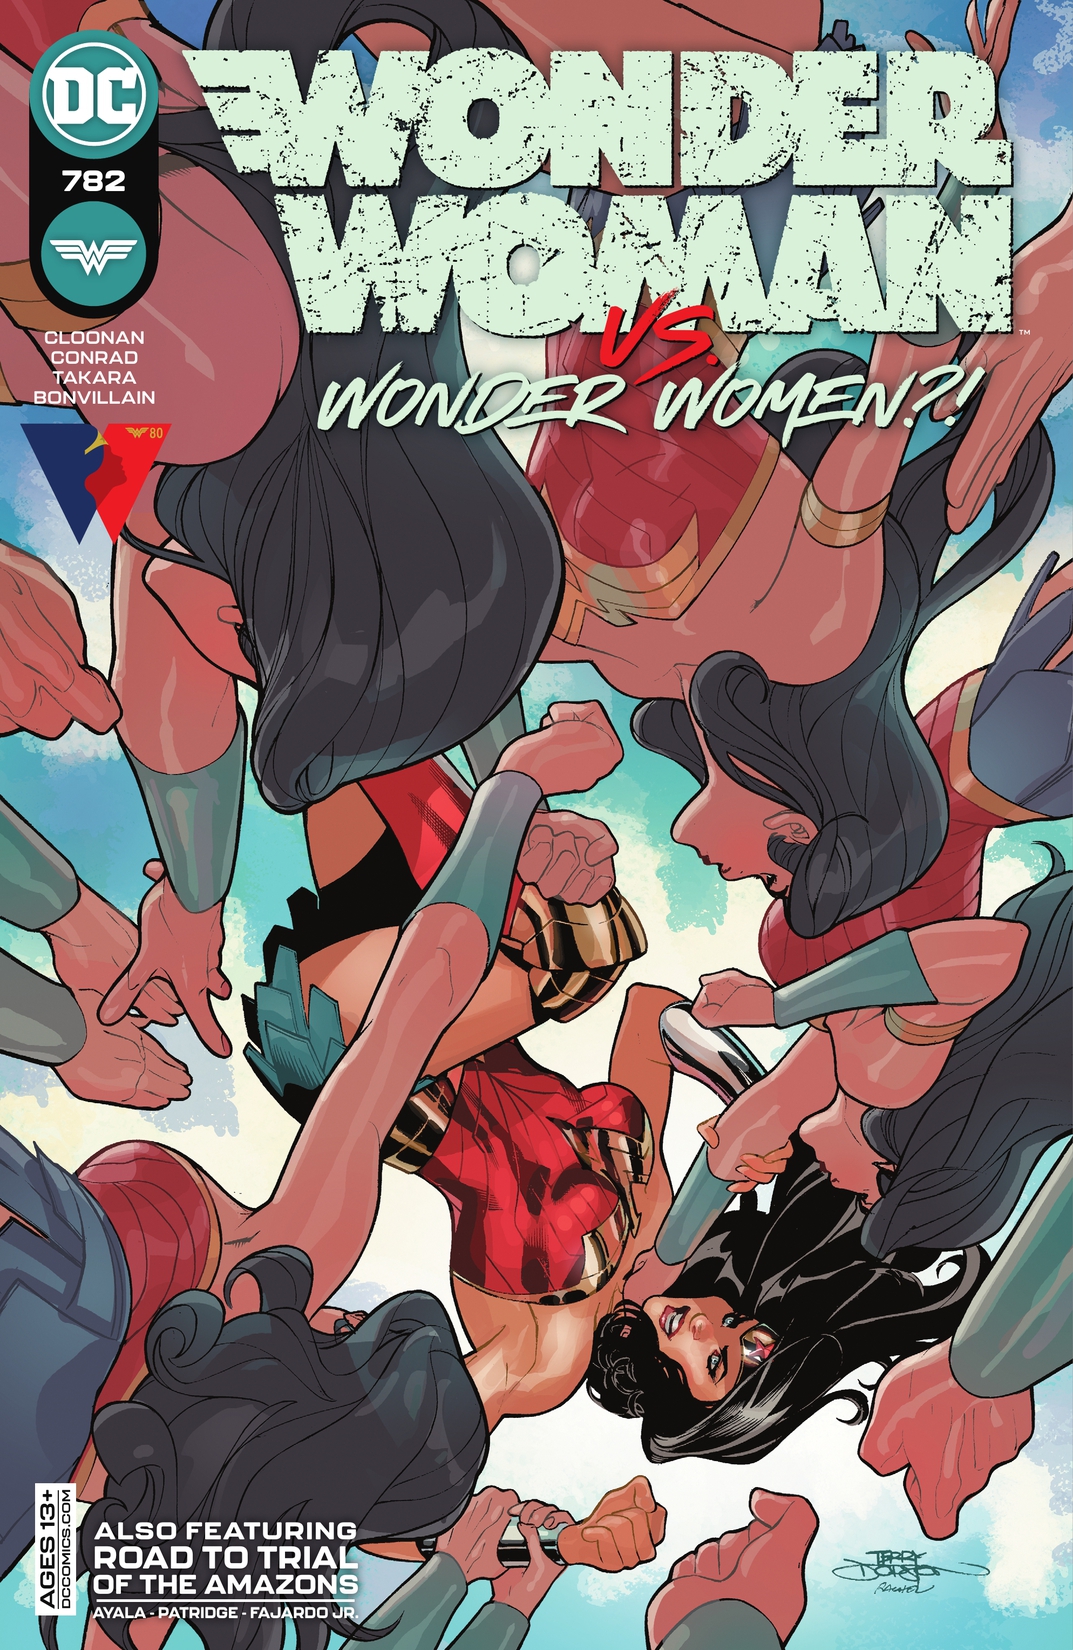 Wonder Woman (2016-) #782 preview images